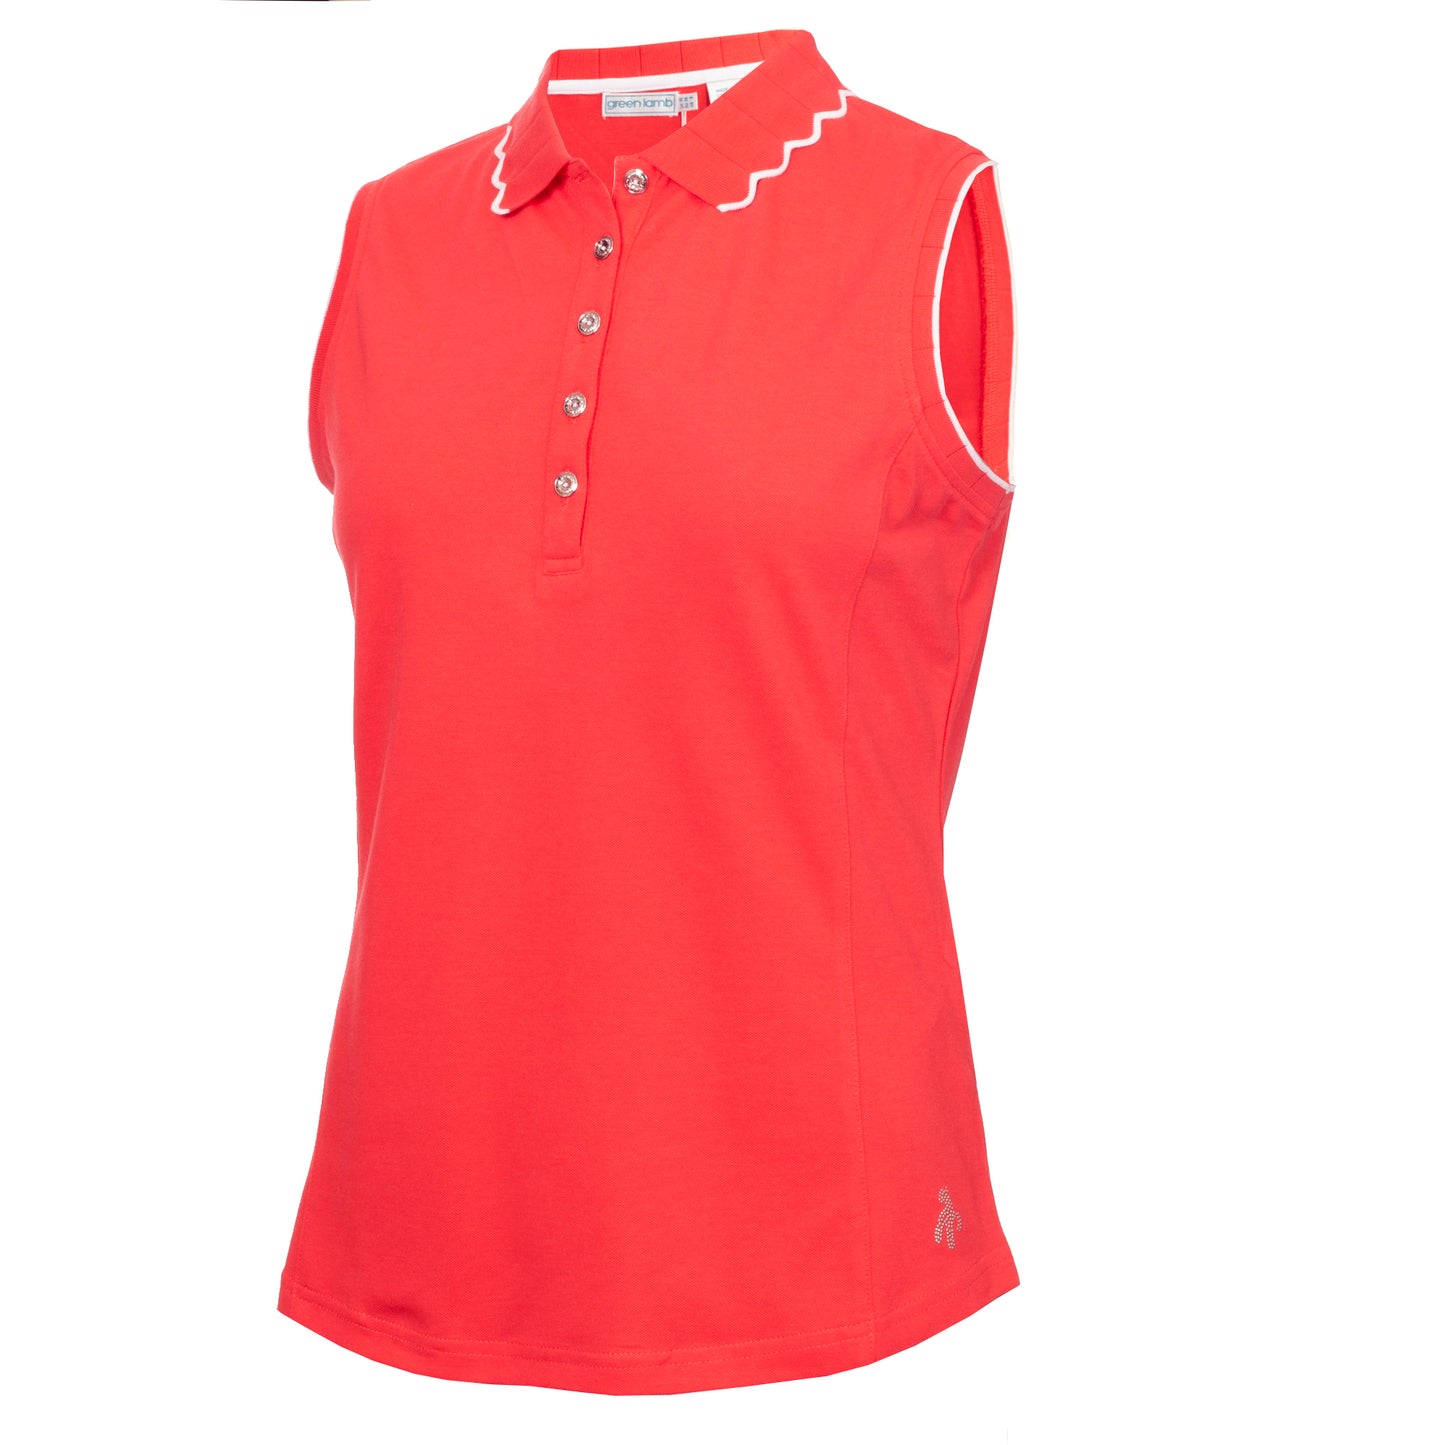 Green Lamb Ladies Sleeveless Polo with Scalloped Collar in Poppy